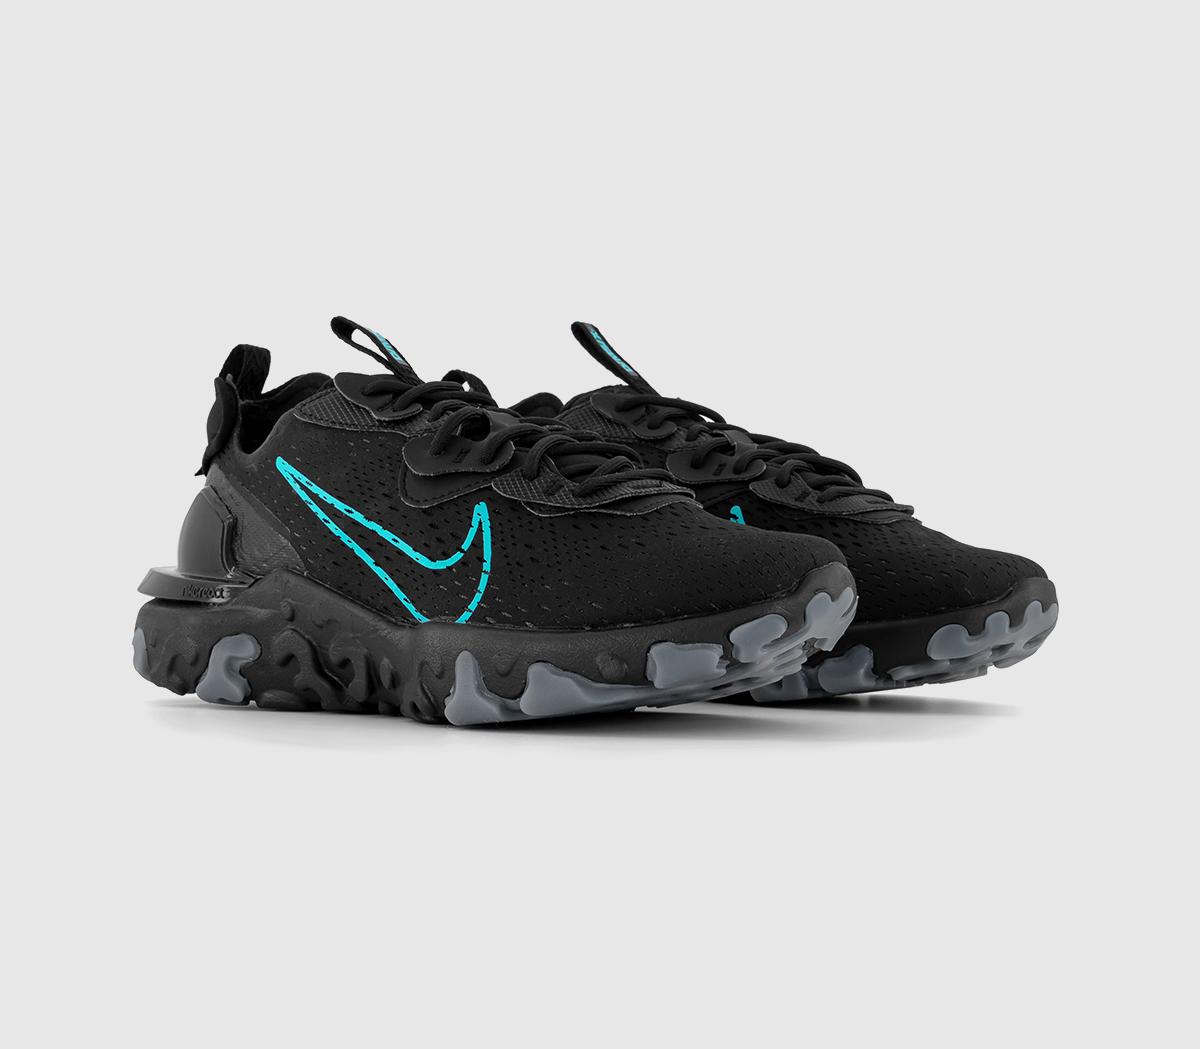 Nike React Vision Trainers Black Dusty Cactus Cool Grey, 9.5